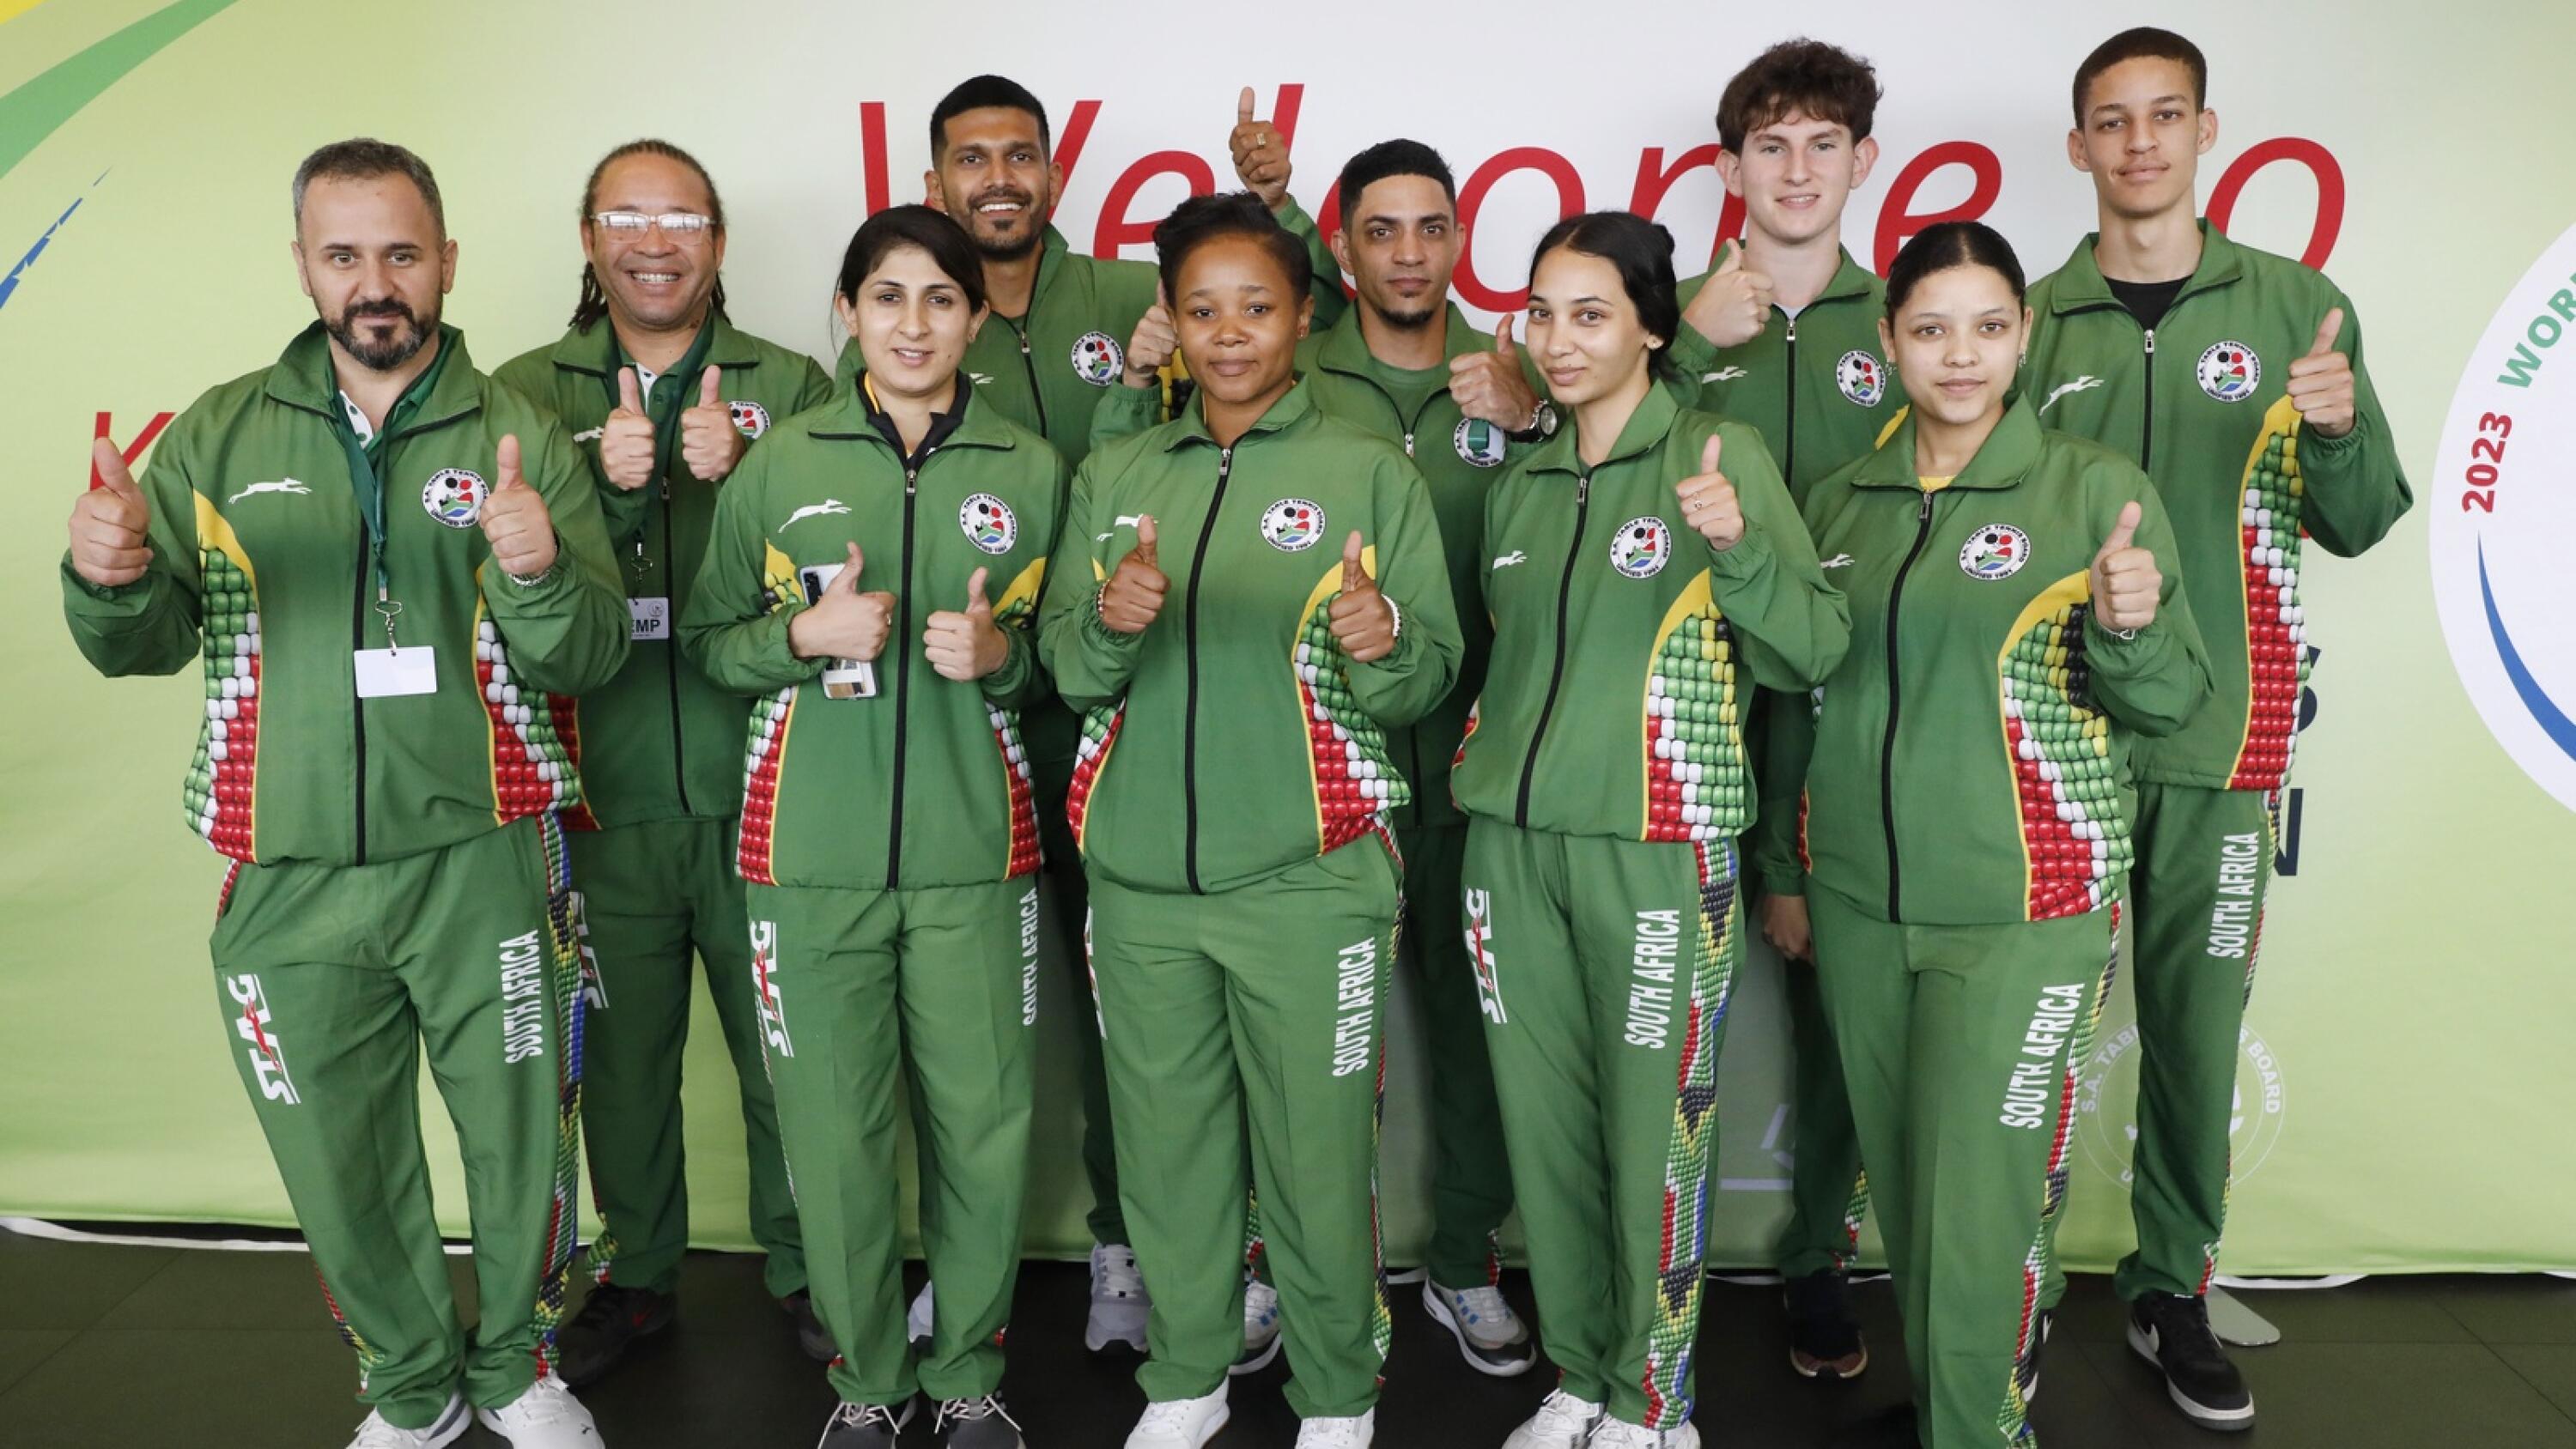 Table tennis team in green South African tracksuits give a thumbs-up sign